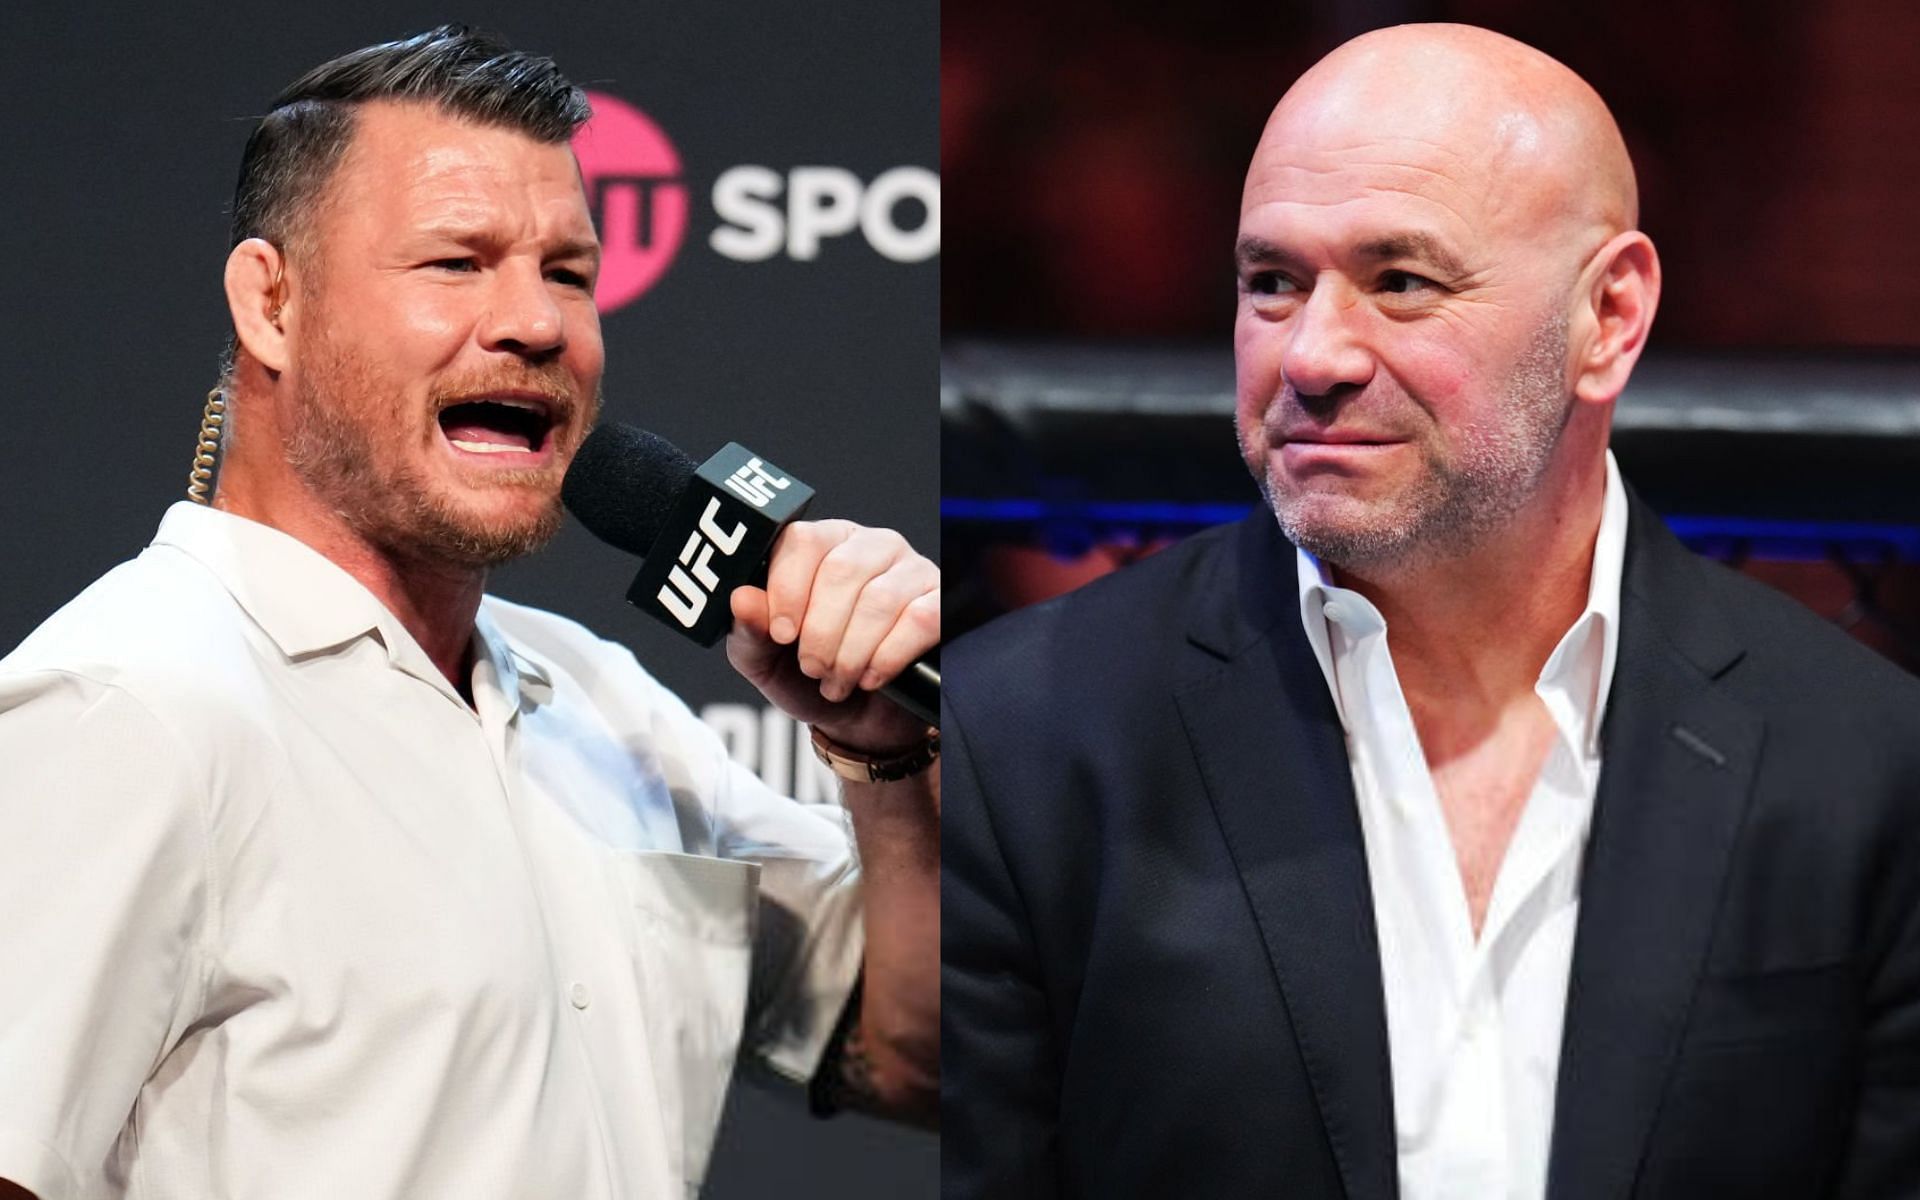 Michael Bisping (left) and UFC president Dana White (right) [Images Courtesy: @GettyImages]